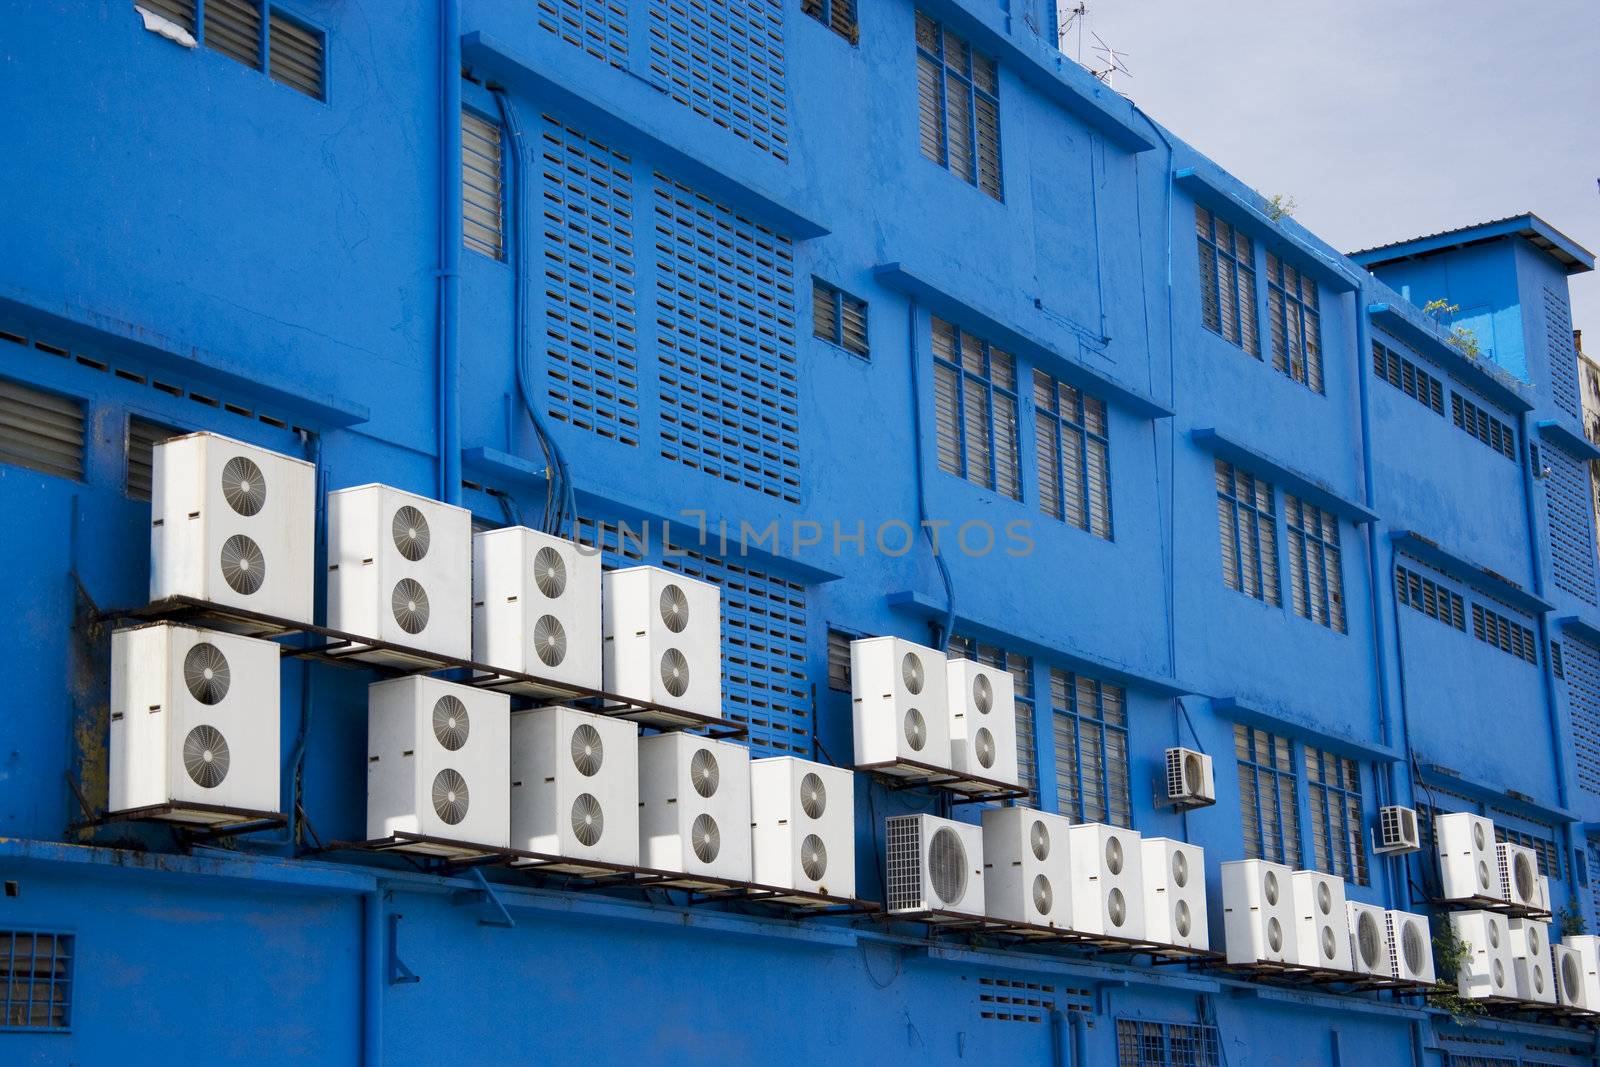 Image of aircondition compressors on a blue building.